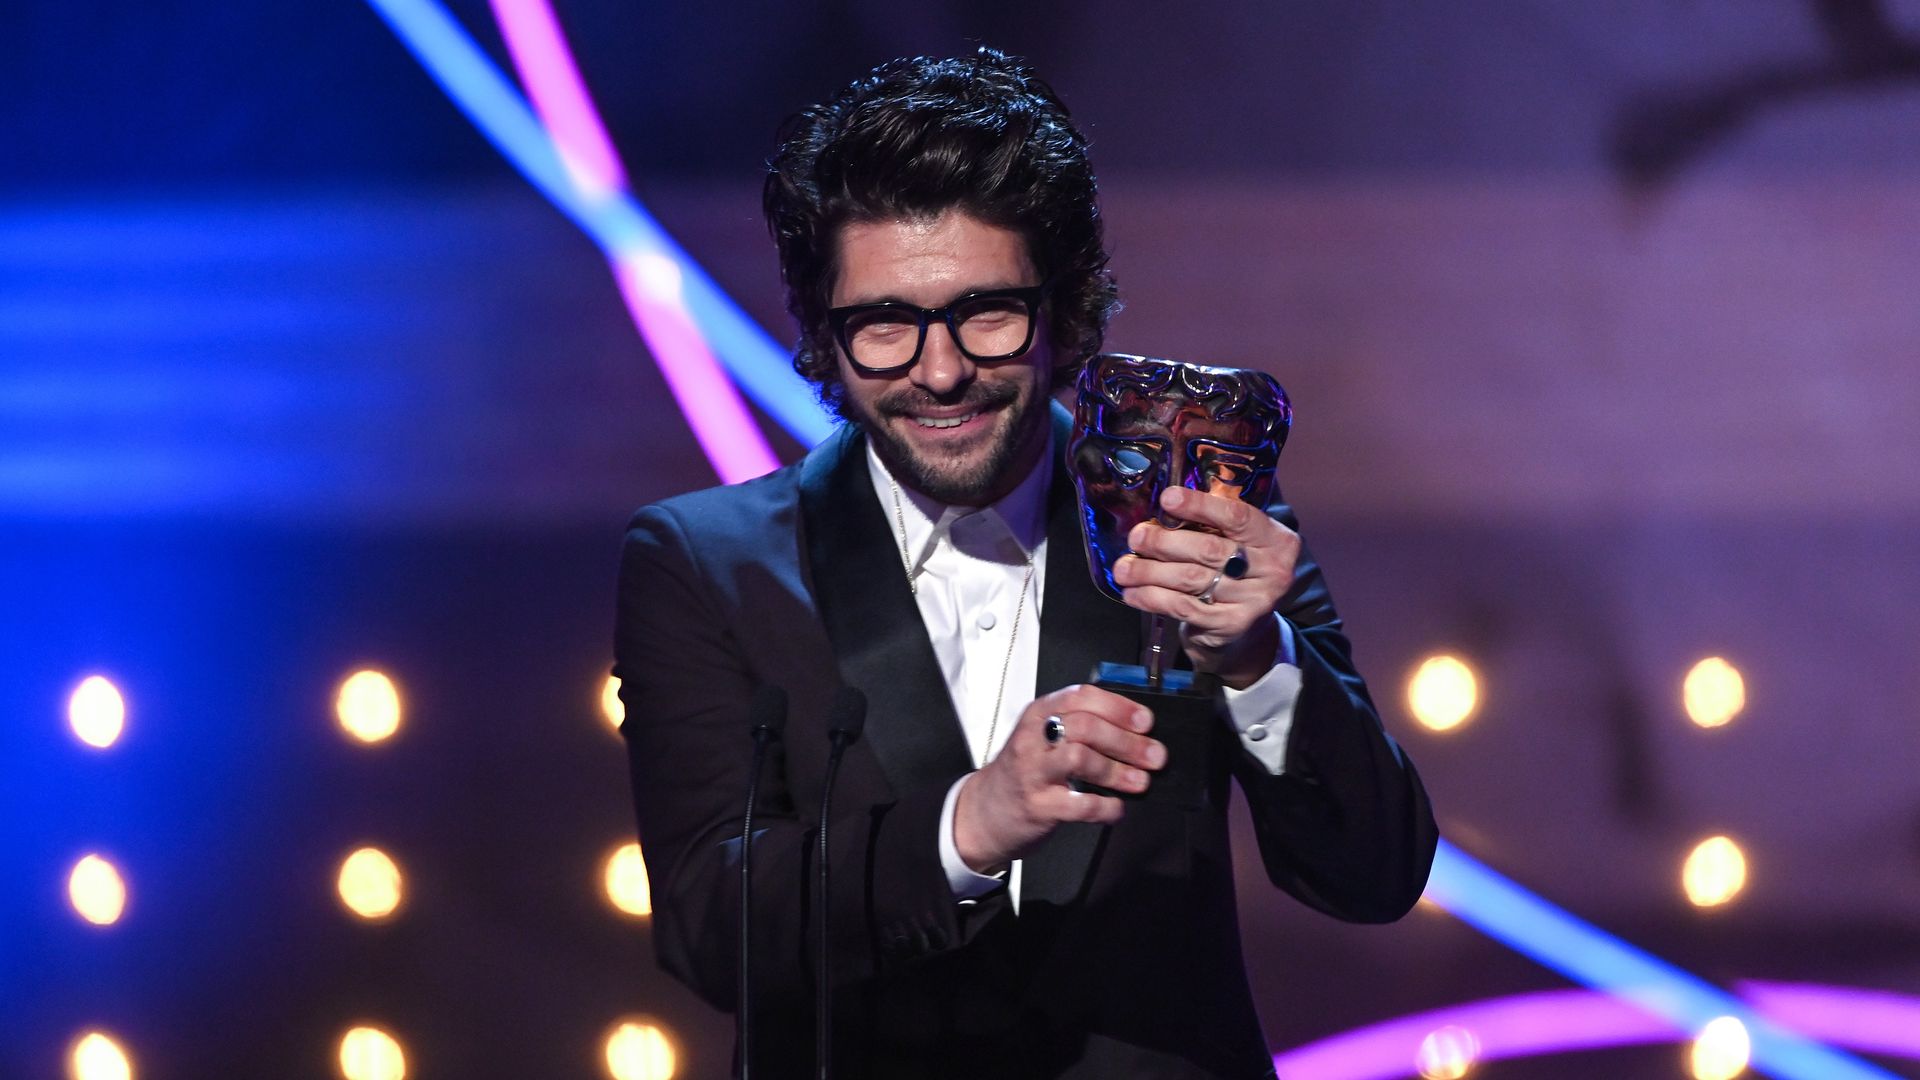 Ben Whishaw accepts the Leading Actor Award for his performance in 'The Is Going To Hurt' at the 2023 BAFTA Television Awards 